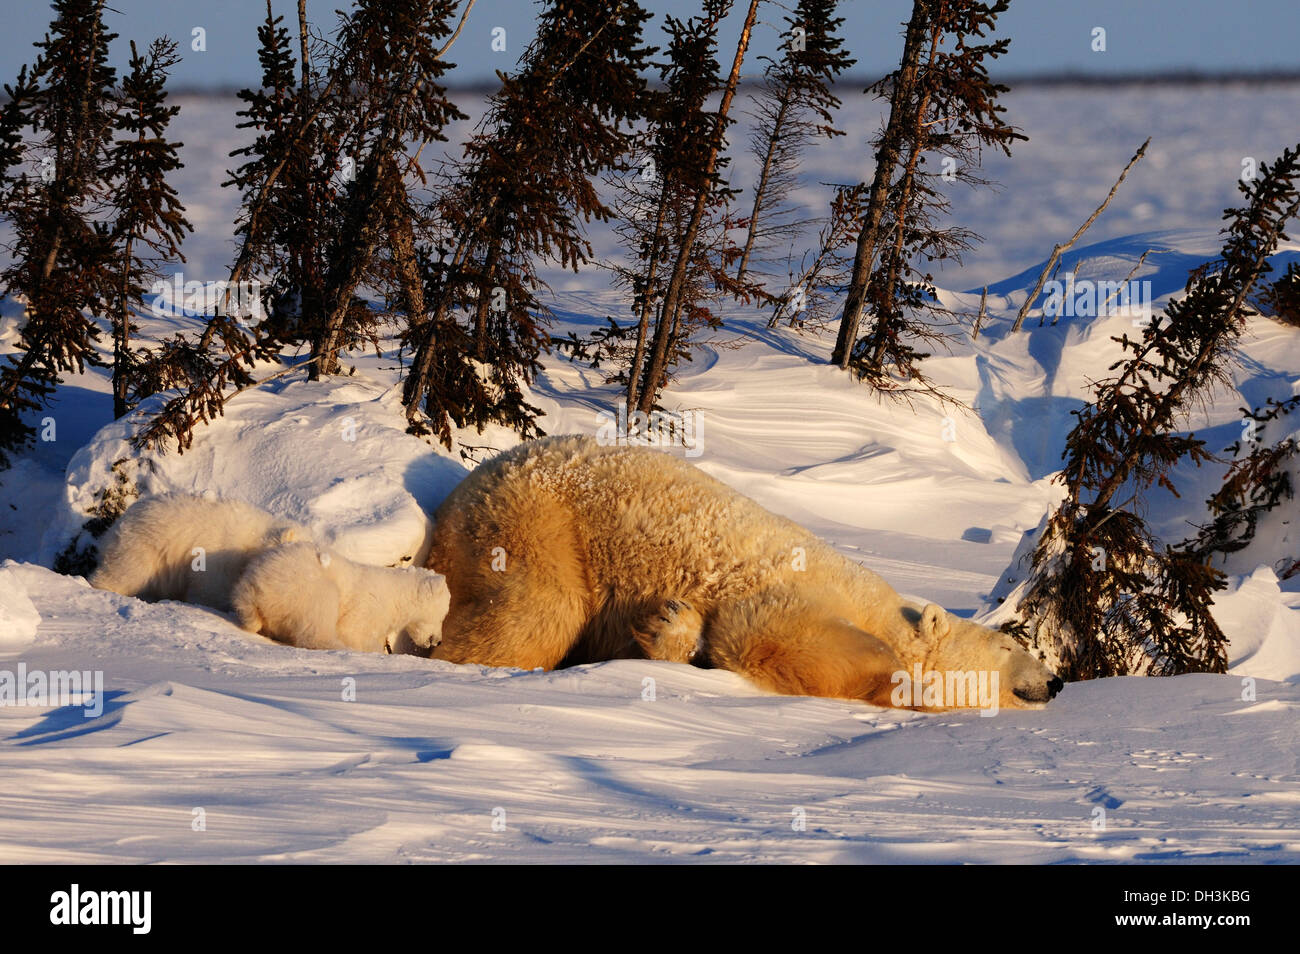 Polar bear sow (Ursus maritimus) with cubs enjoying the evening sun, lying behind a row of trees sheltered from the wind Stock Photo